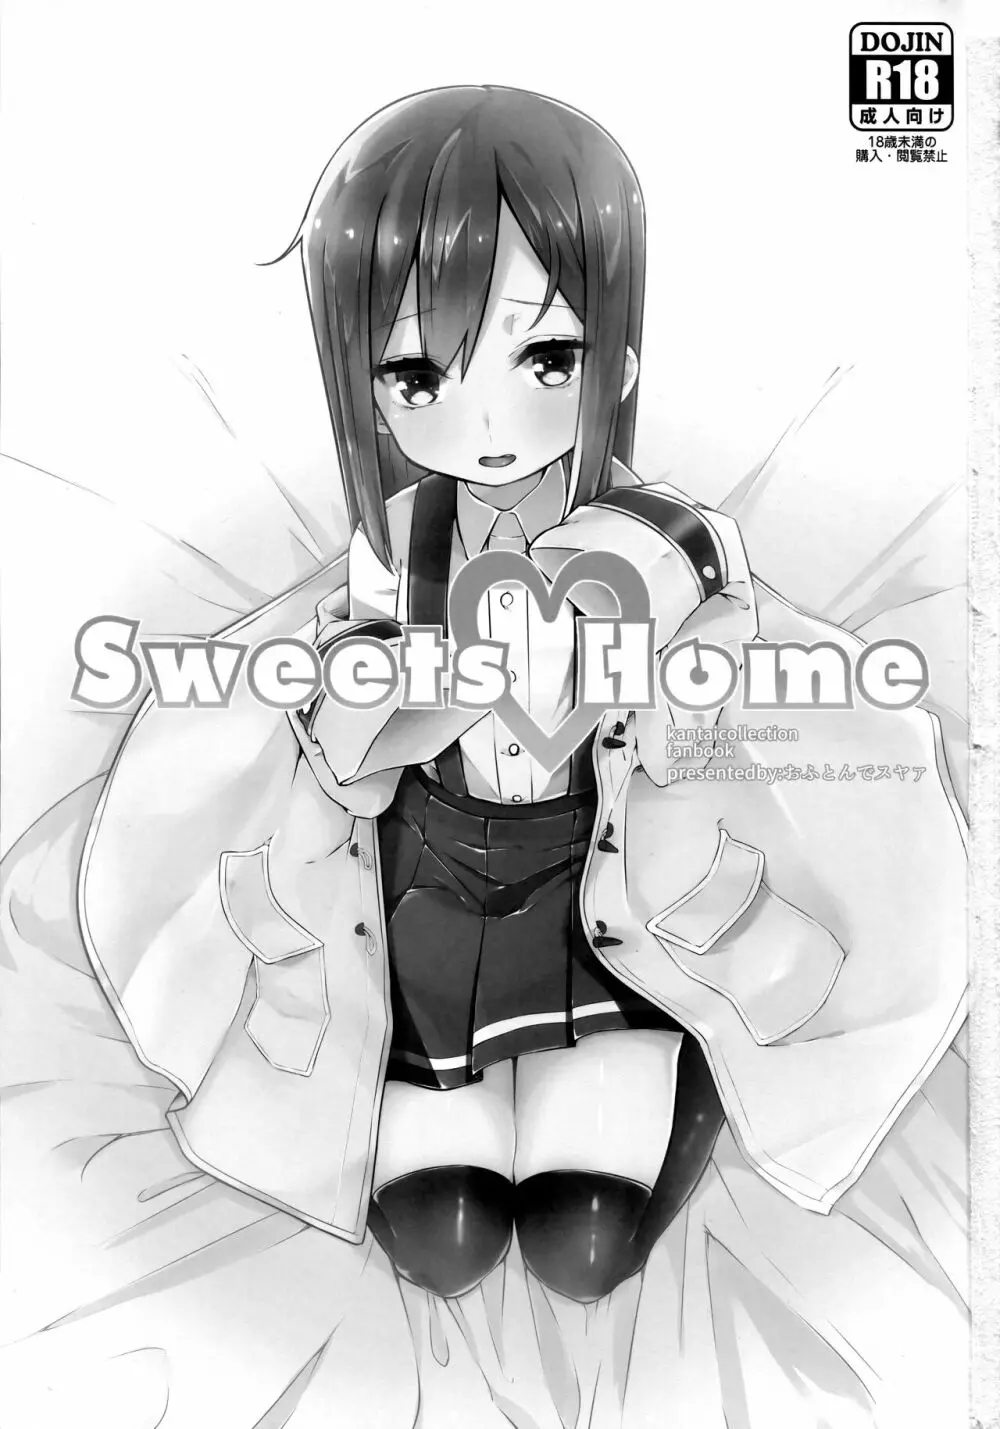 Sweets Home - page2